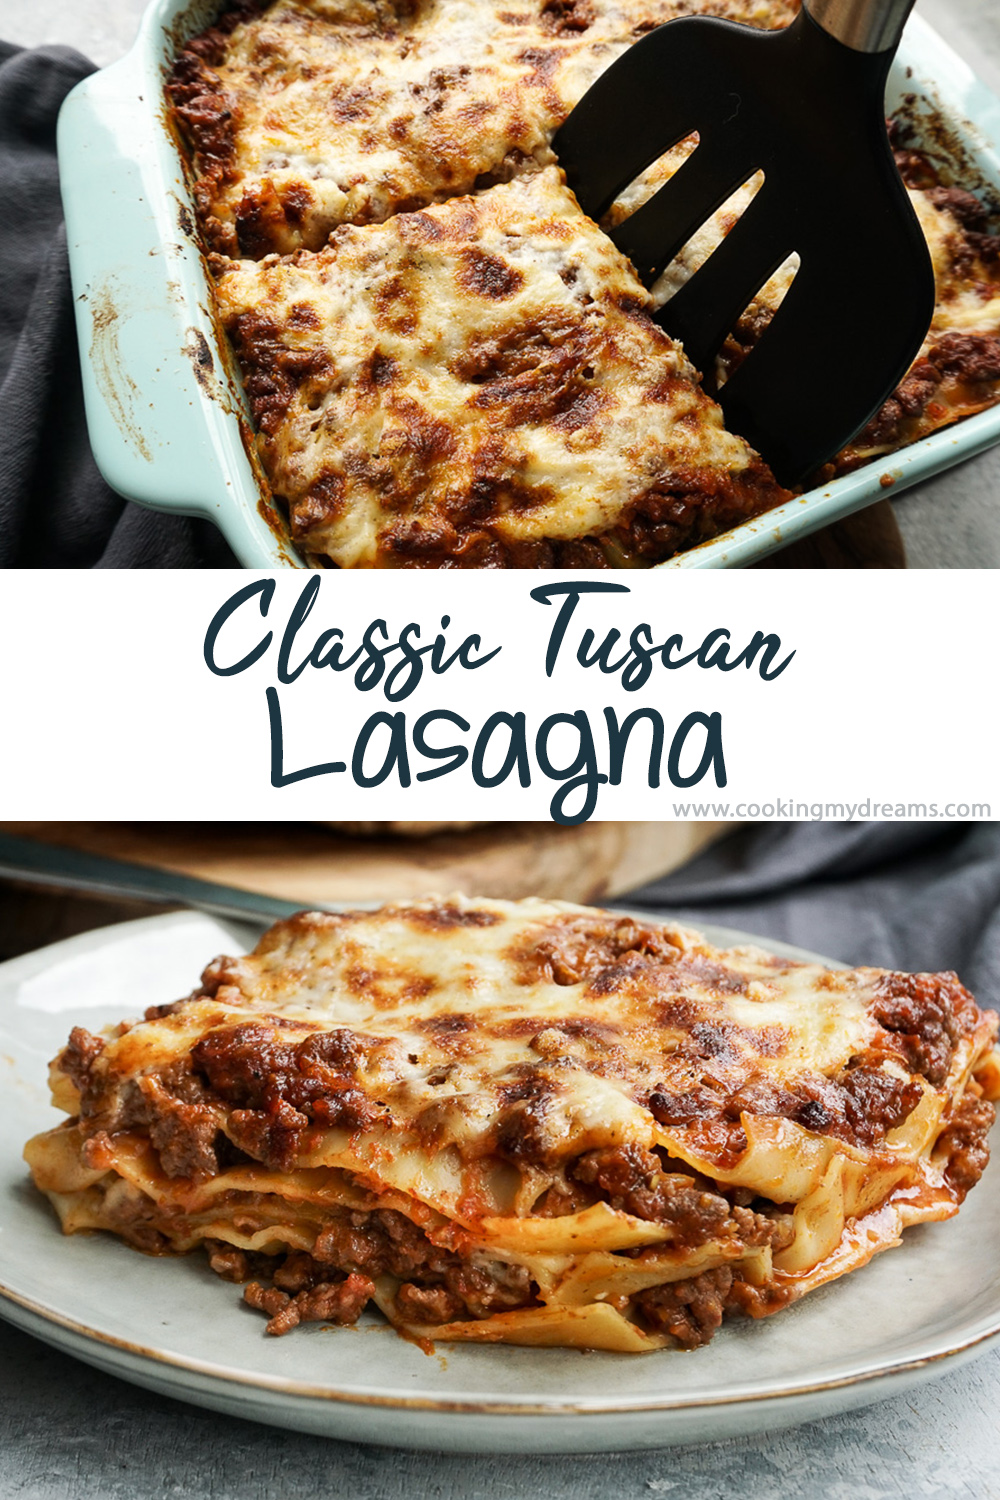 Classic Tuscan Lasagna (with Ragù and Béchamel) - Cooking My Dreams